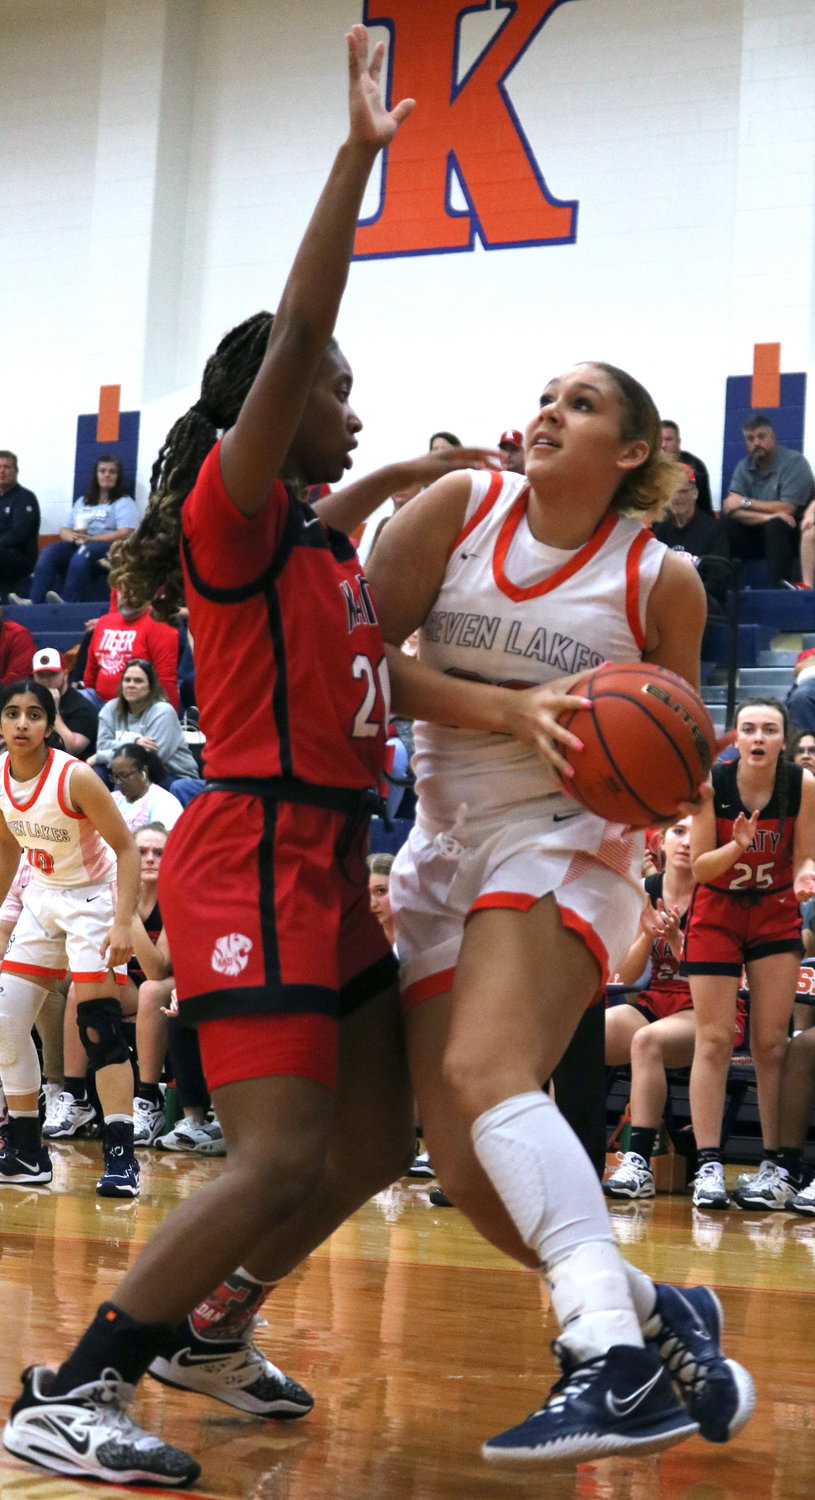 Justice Carlton tries to get around Brianna Nelson during Tuesday's game between Katy and Seven Lakes at the Seven Lakes gym.